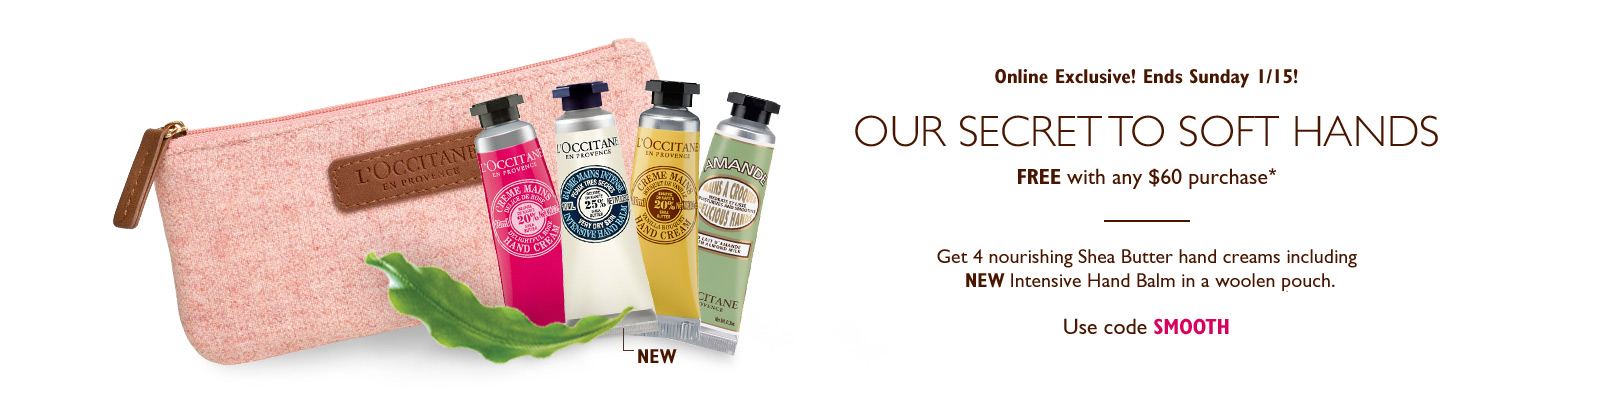 Receive a free 5- piece bonus gift with your $60 L'Occitane purchase